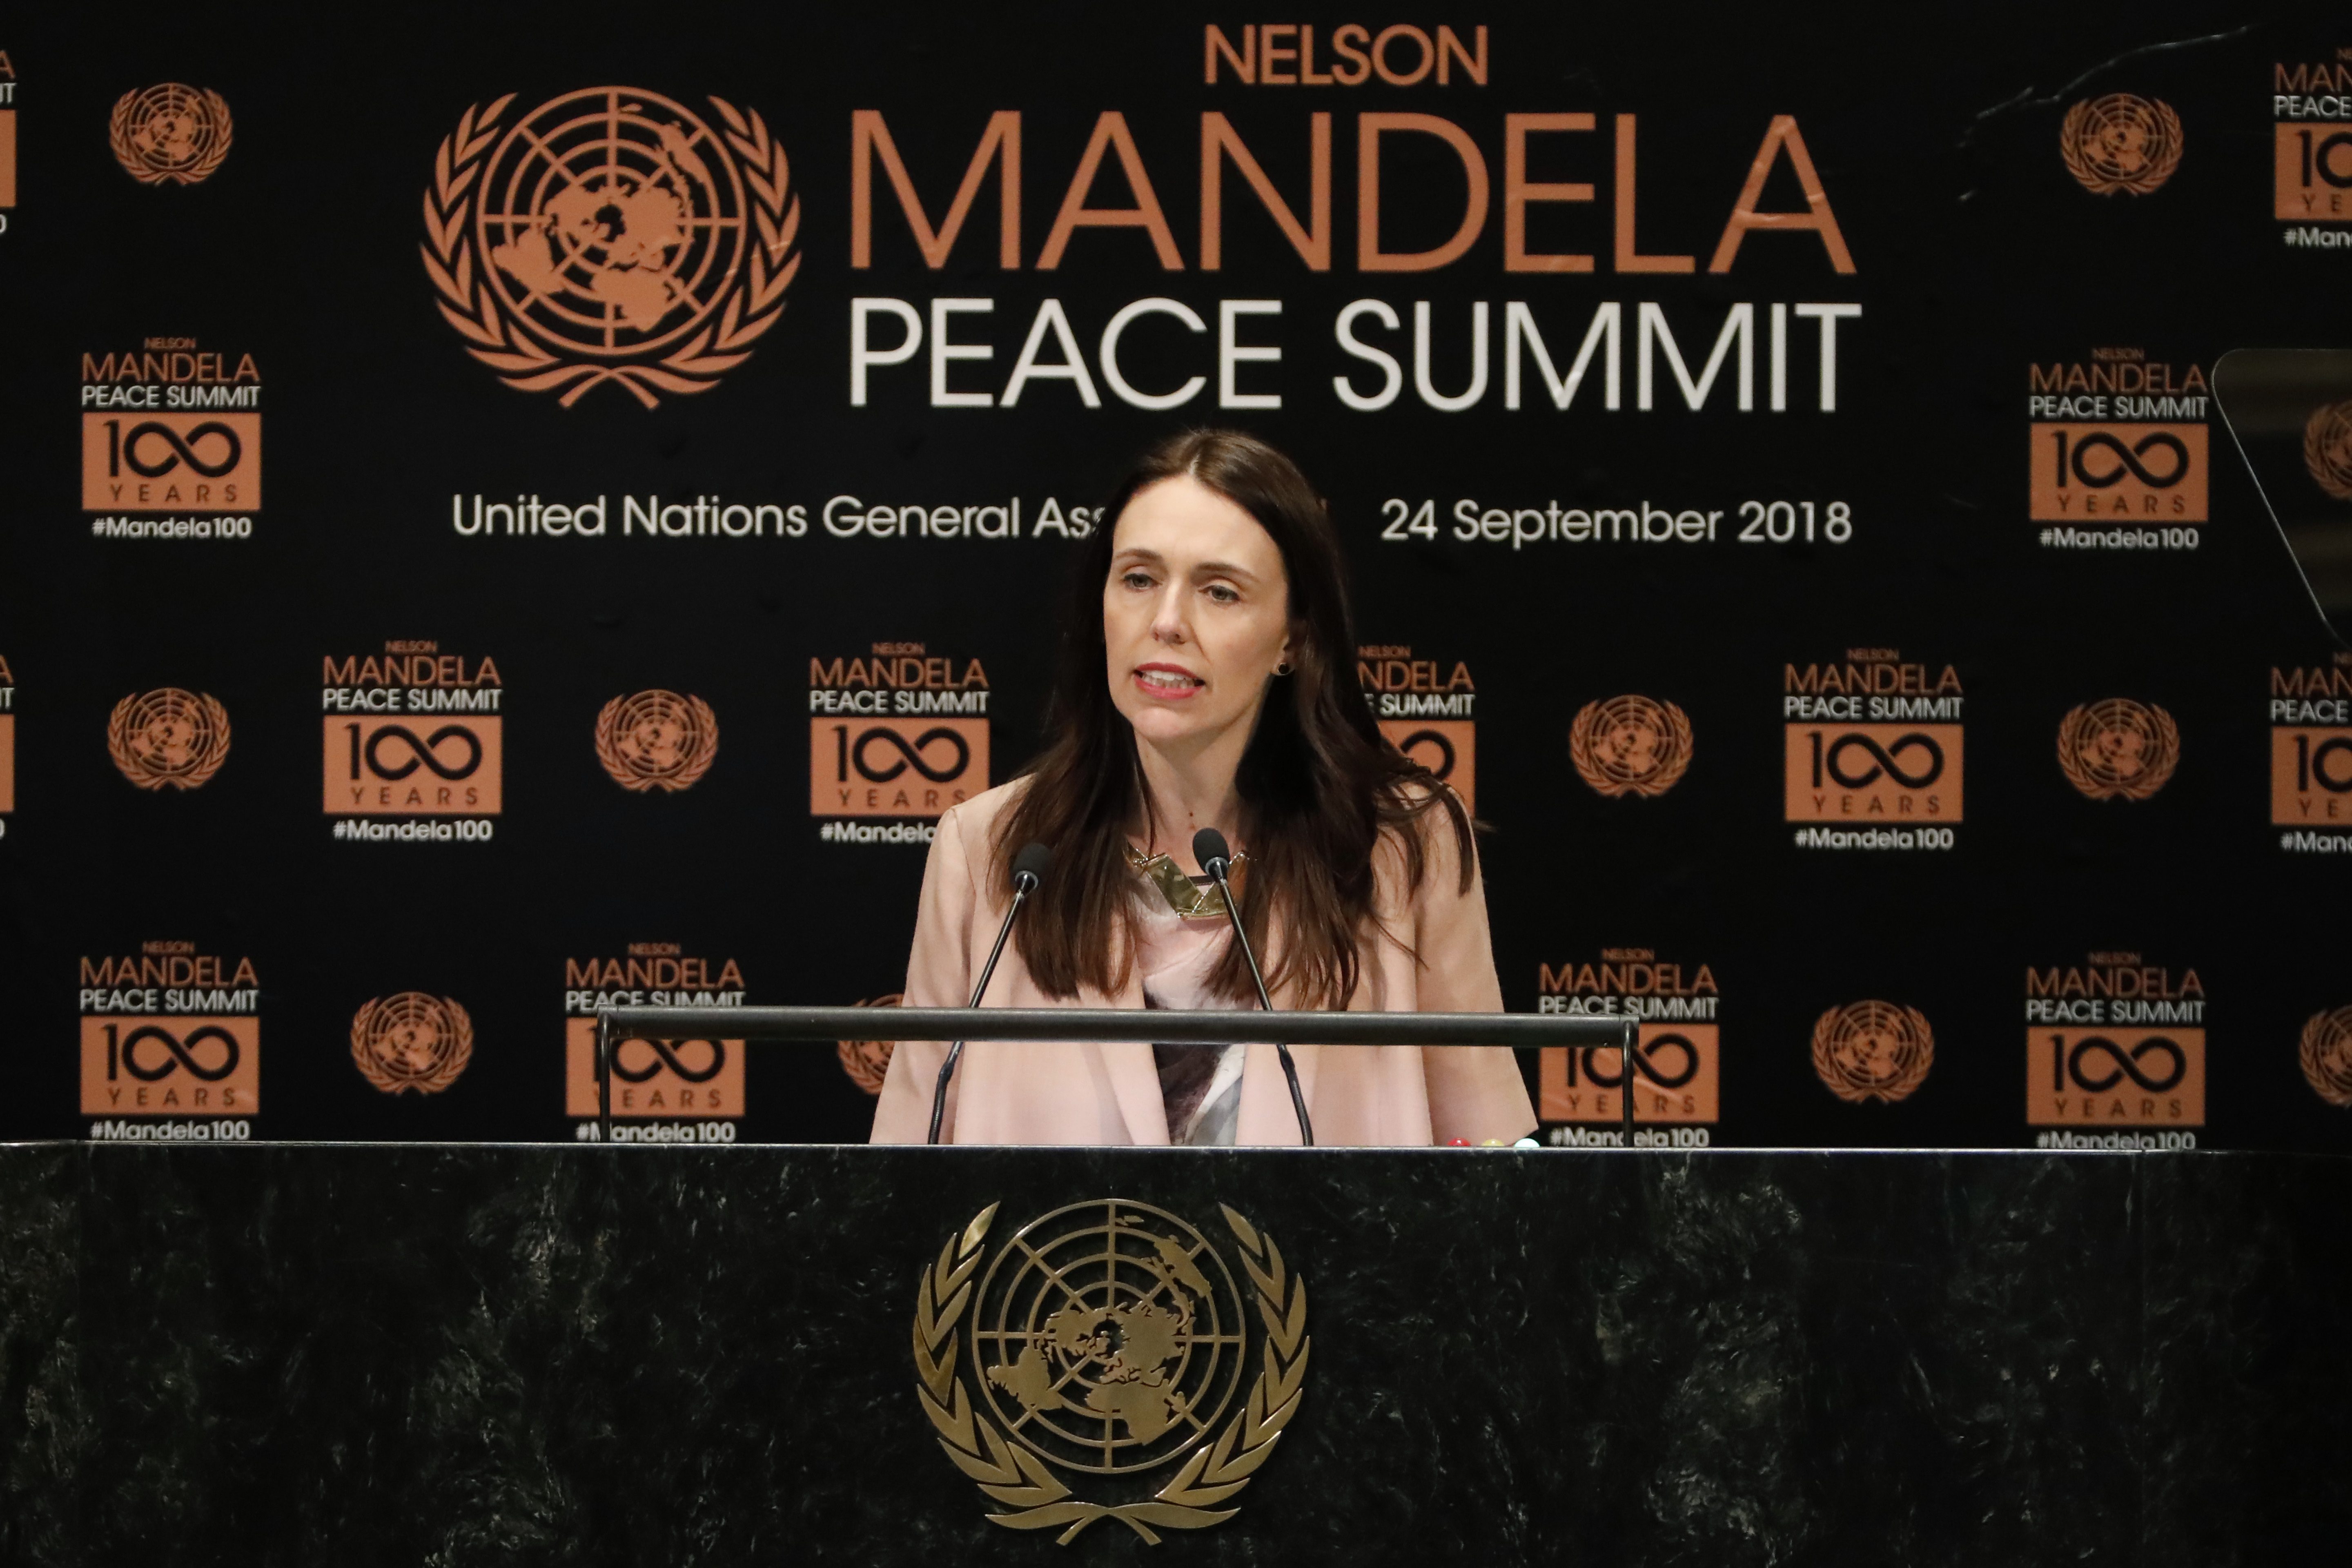 New Zealand Prime Minister Jacinda Ardern addresses the Nelson Mandela Peace Summit in the United Nations General Assembly, at U.N. headquarters